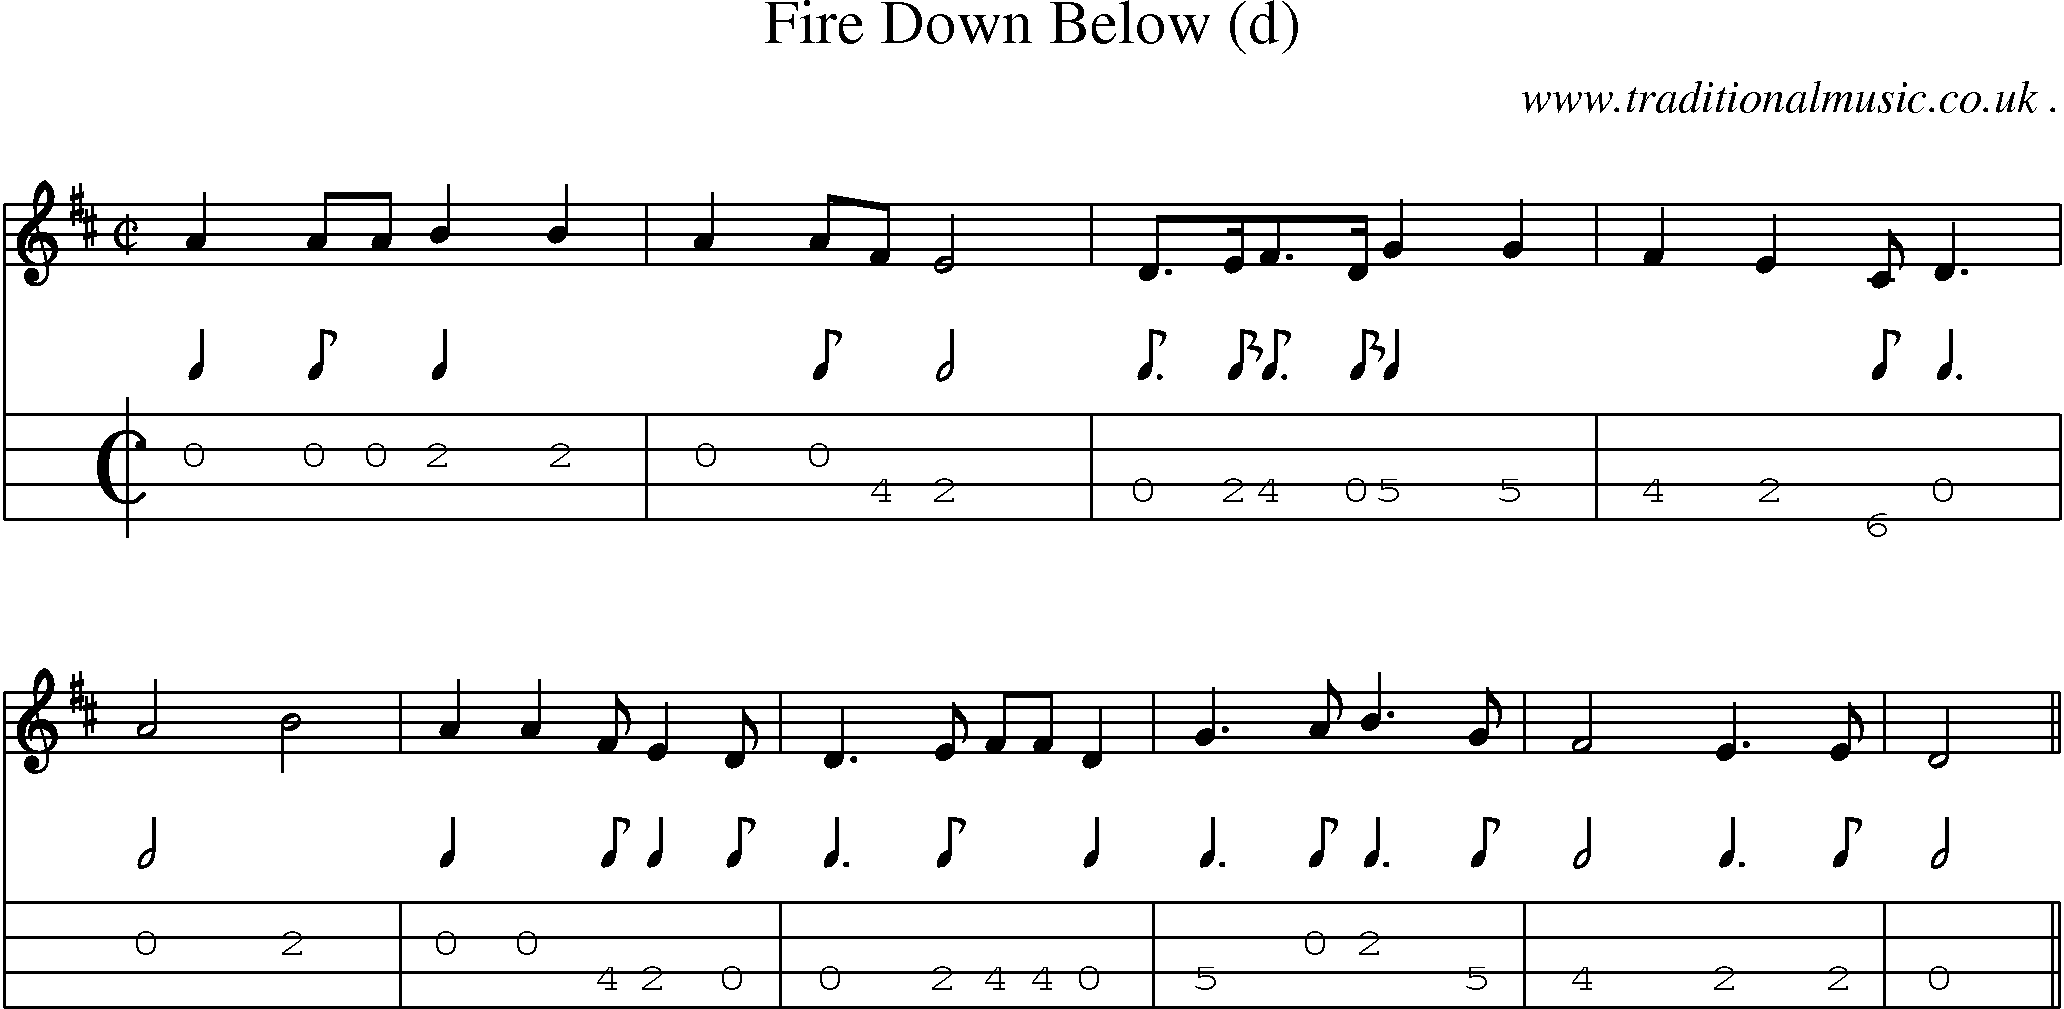 Sheet-Music and Mandolin Tabs for Fire Down Below (d)